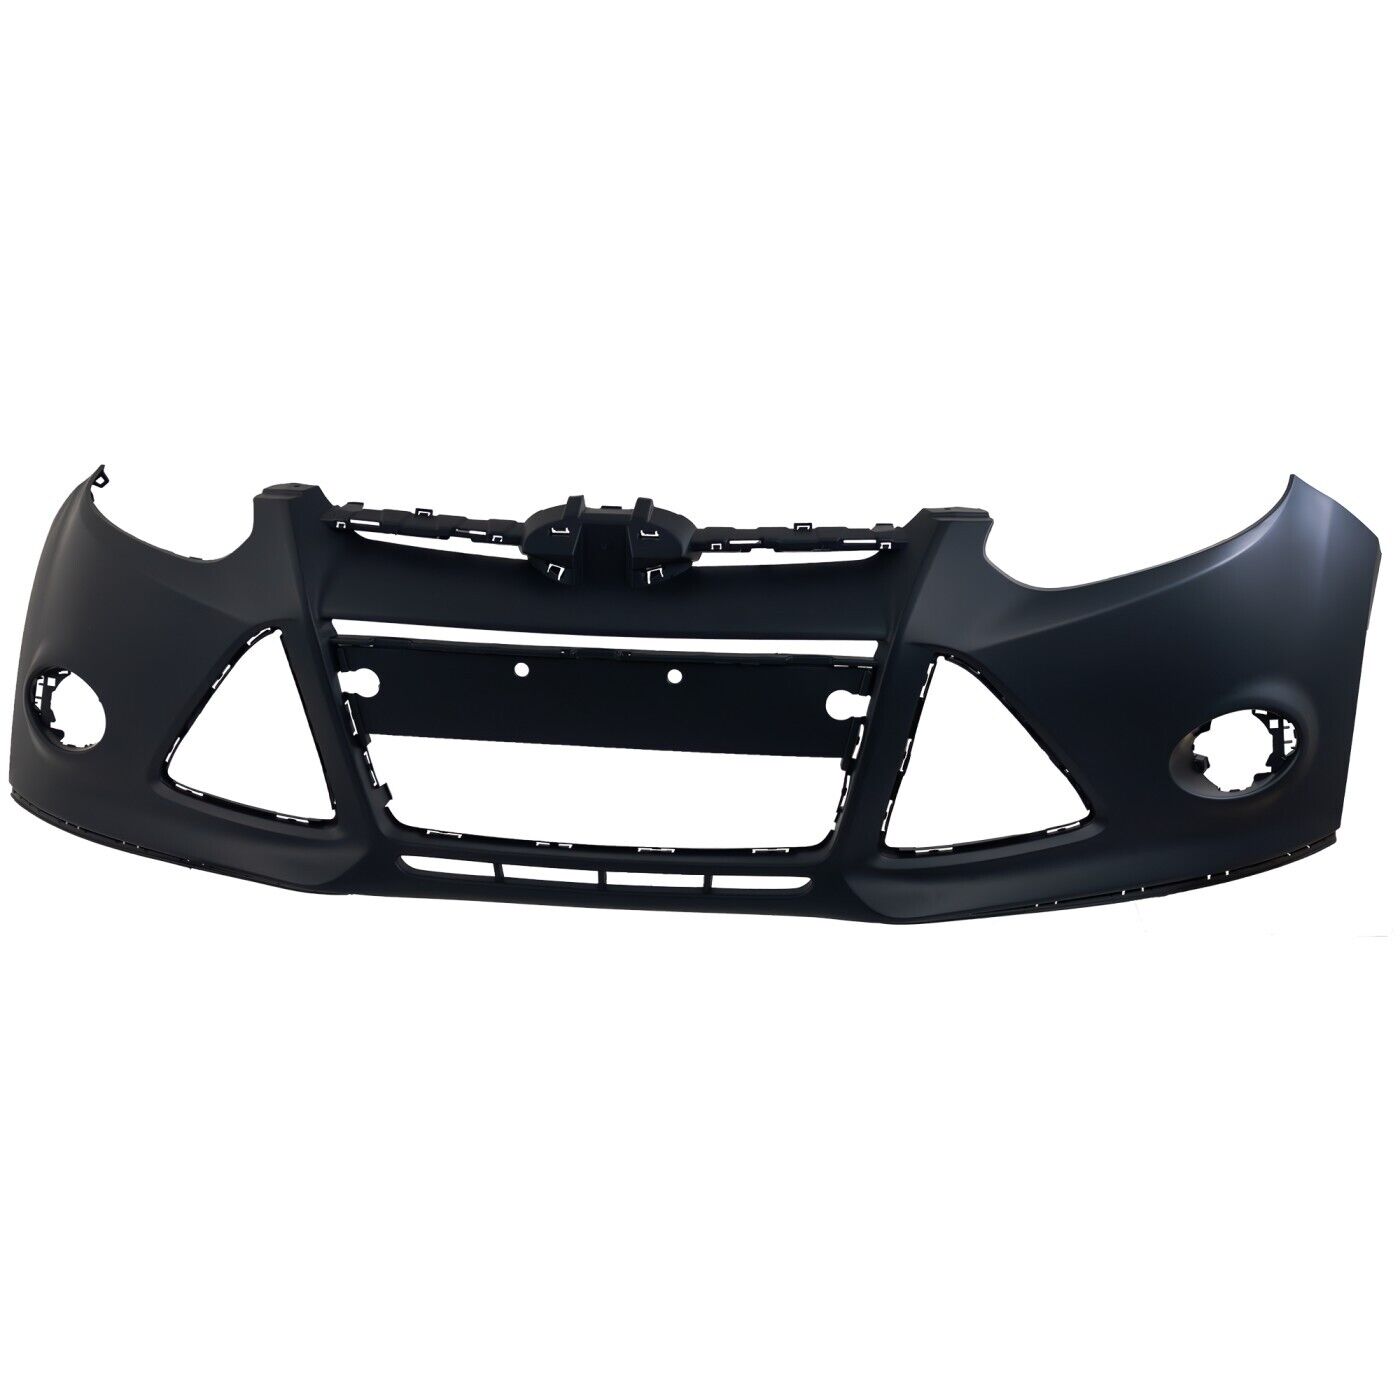 Front Bumper Cover For 2012-2014 Ford Focus w/ fog lamp holes Primed CAPA